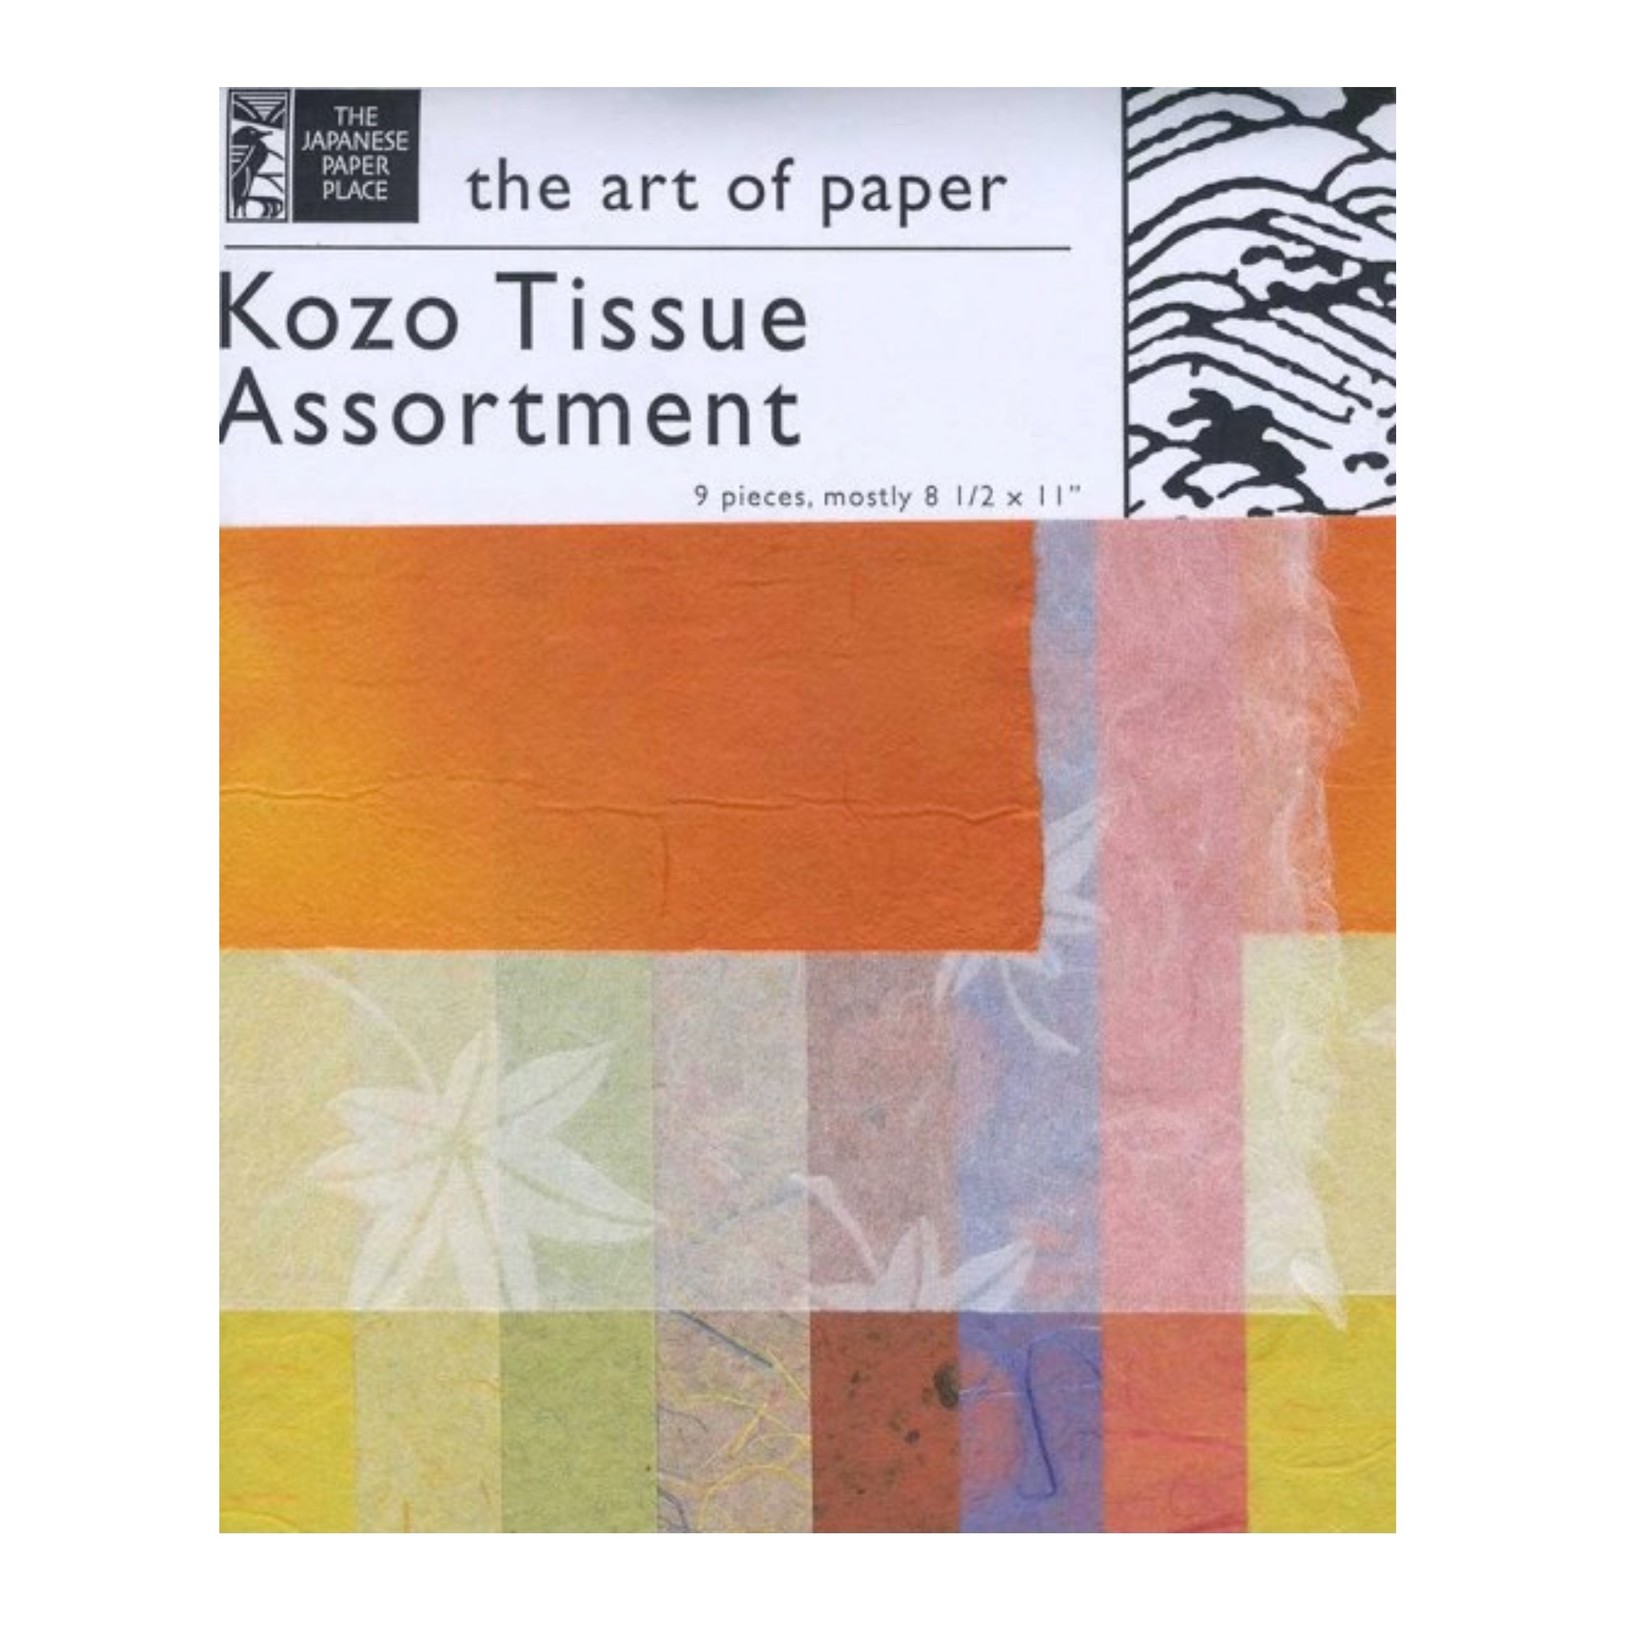 the Japanese paper place Kozo Tissue Assortment